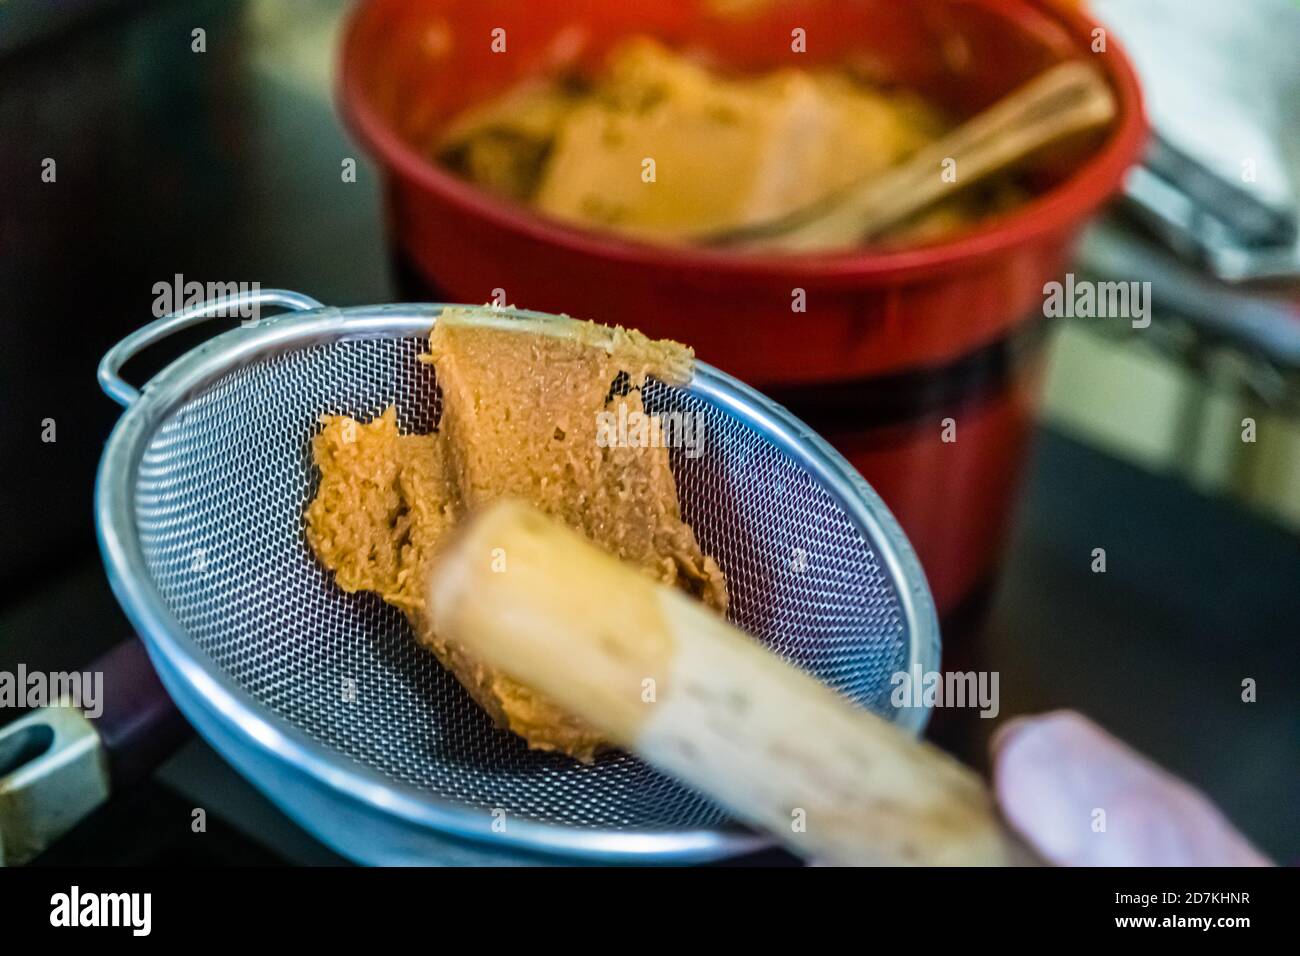 Making a Japanese miso soup in Nishiizu, Japan. Flavor booster and namesake of the soup. Only in the third step of the preparation the miso paste goes into the soup Stock Photo